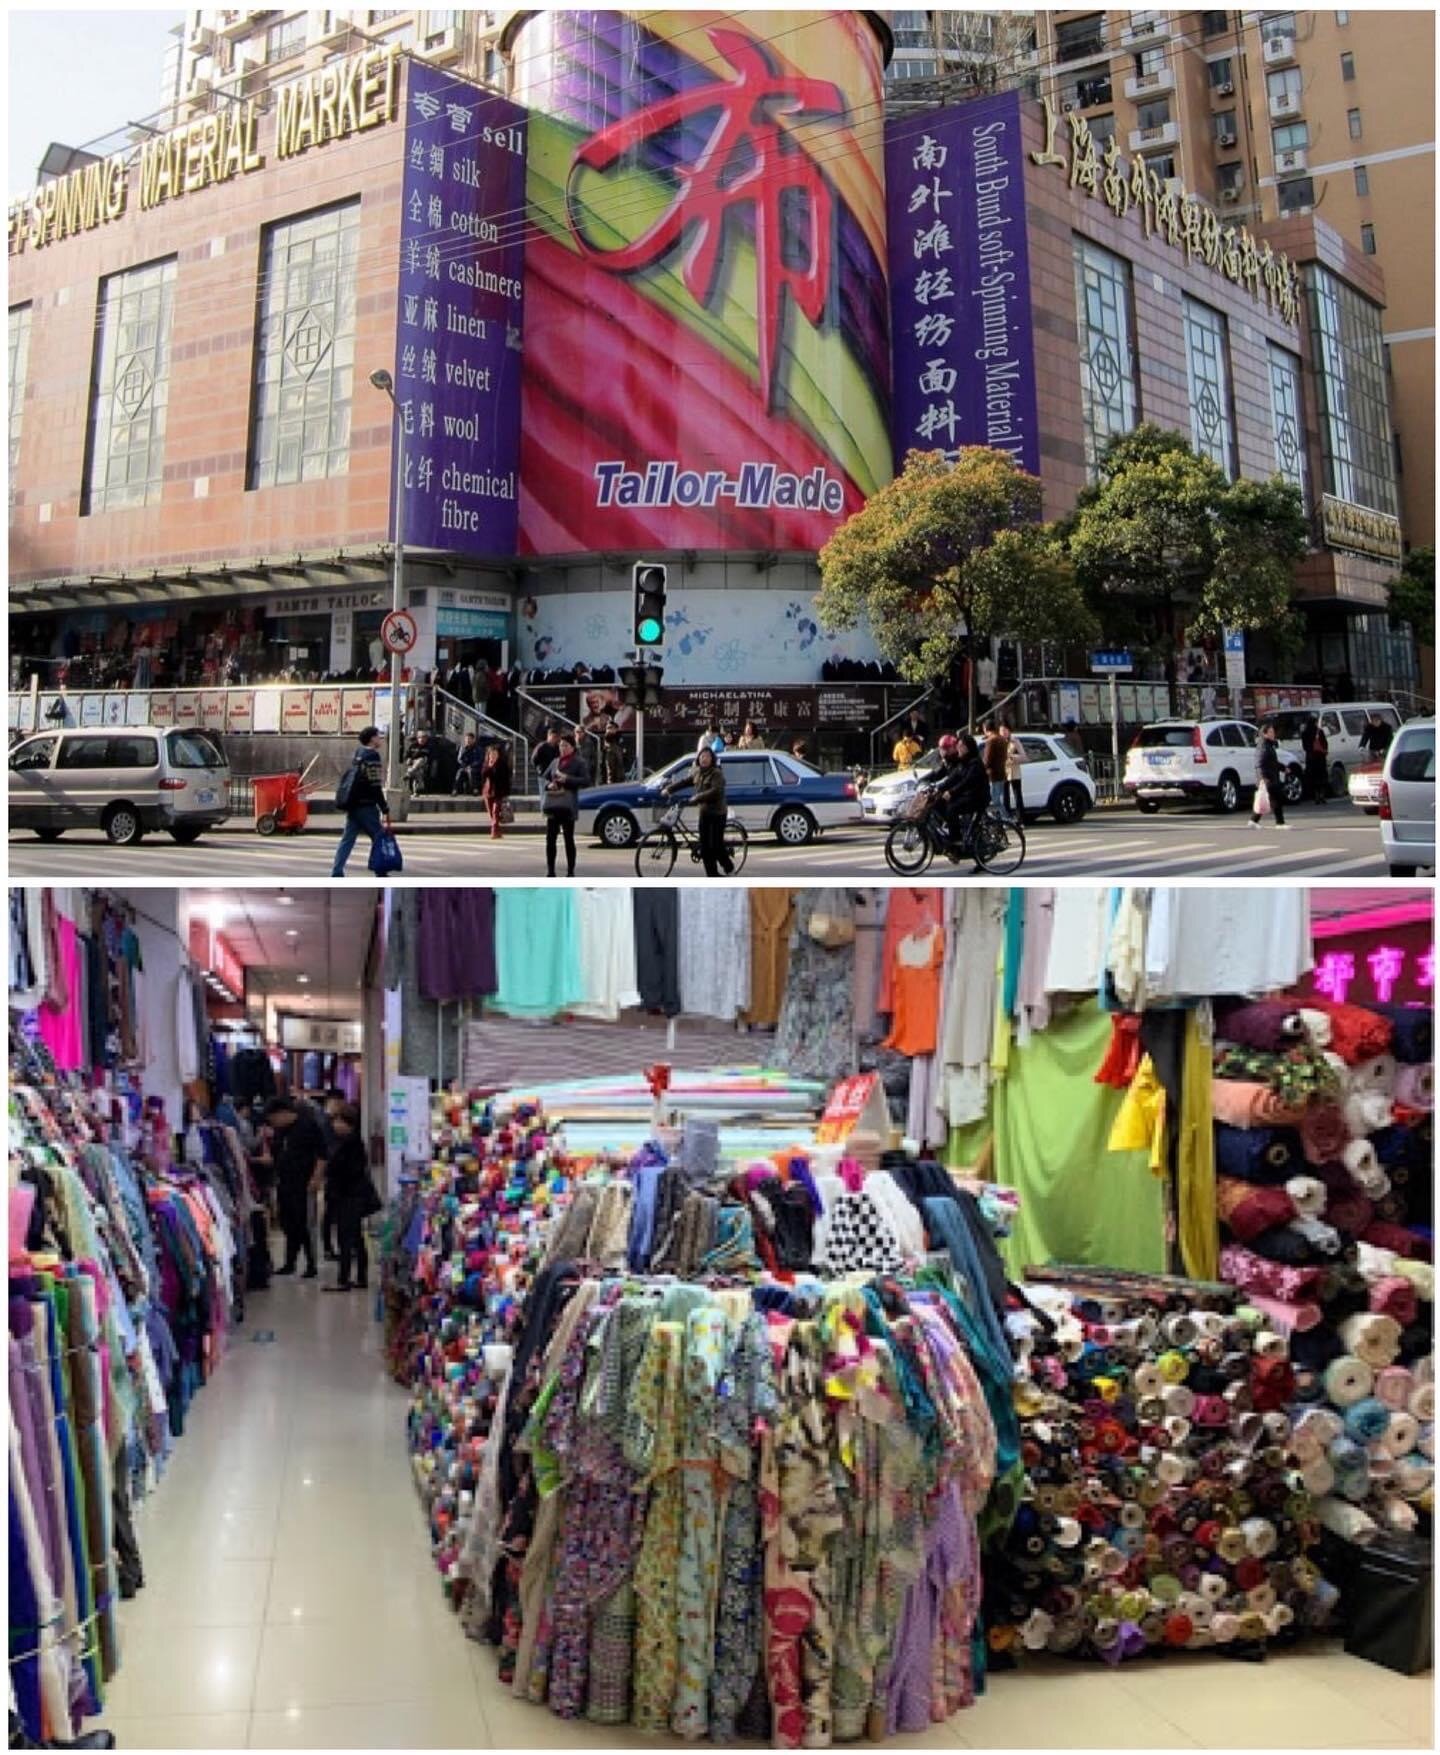 Question 07. Lissanthea Taylor’s worst purchases in China: The outfits she impulsively had tailored at the fabric market.